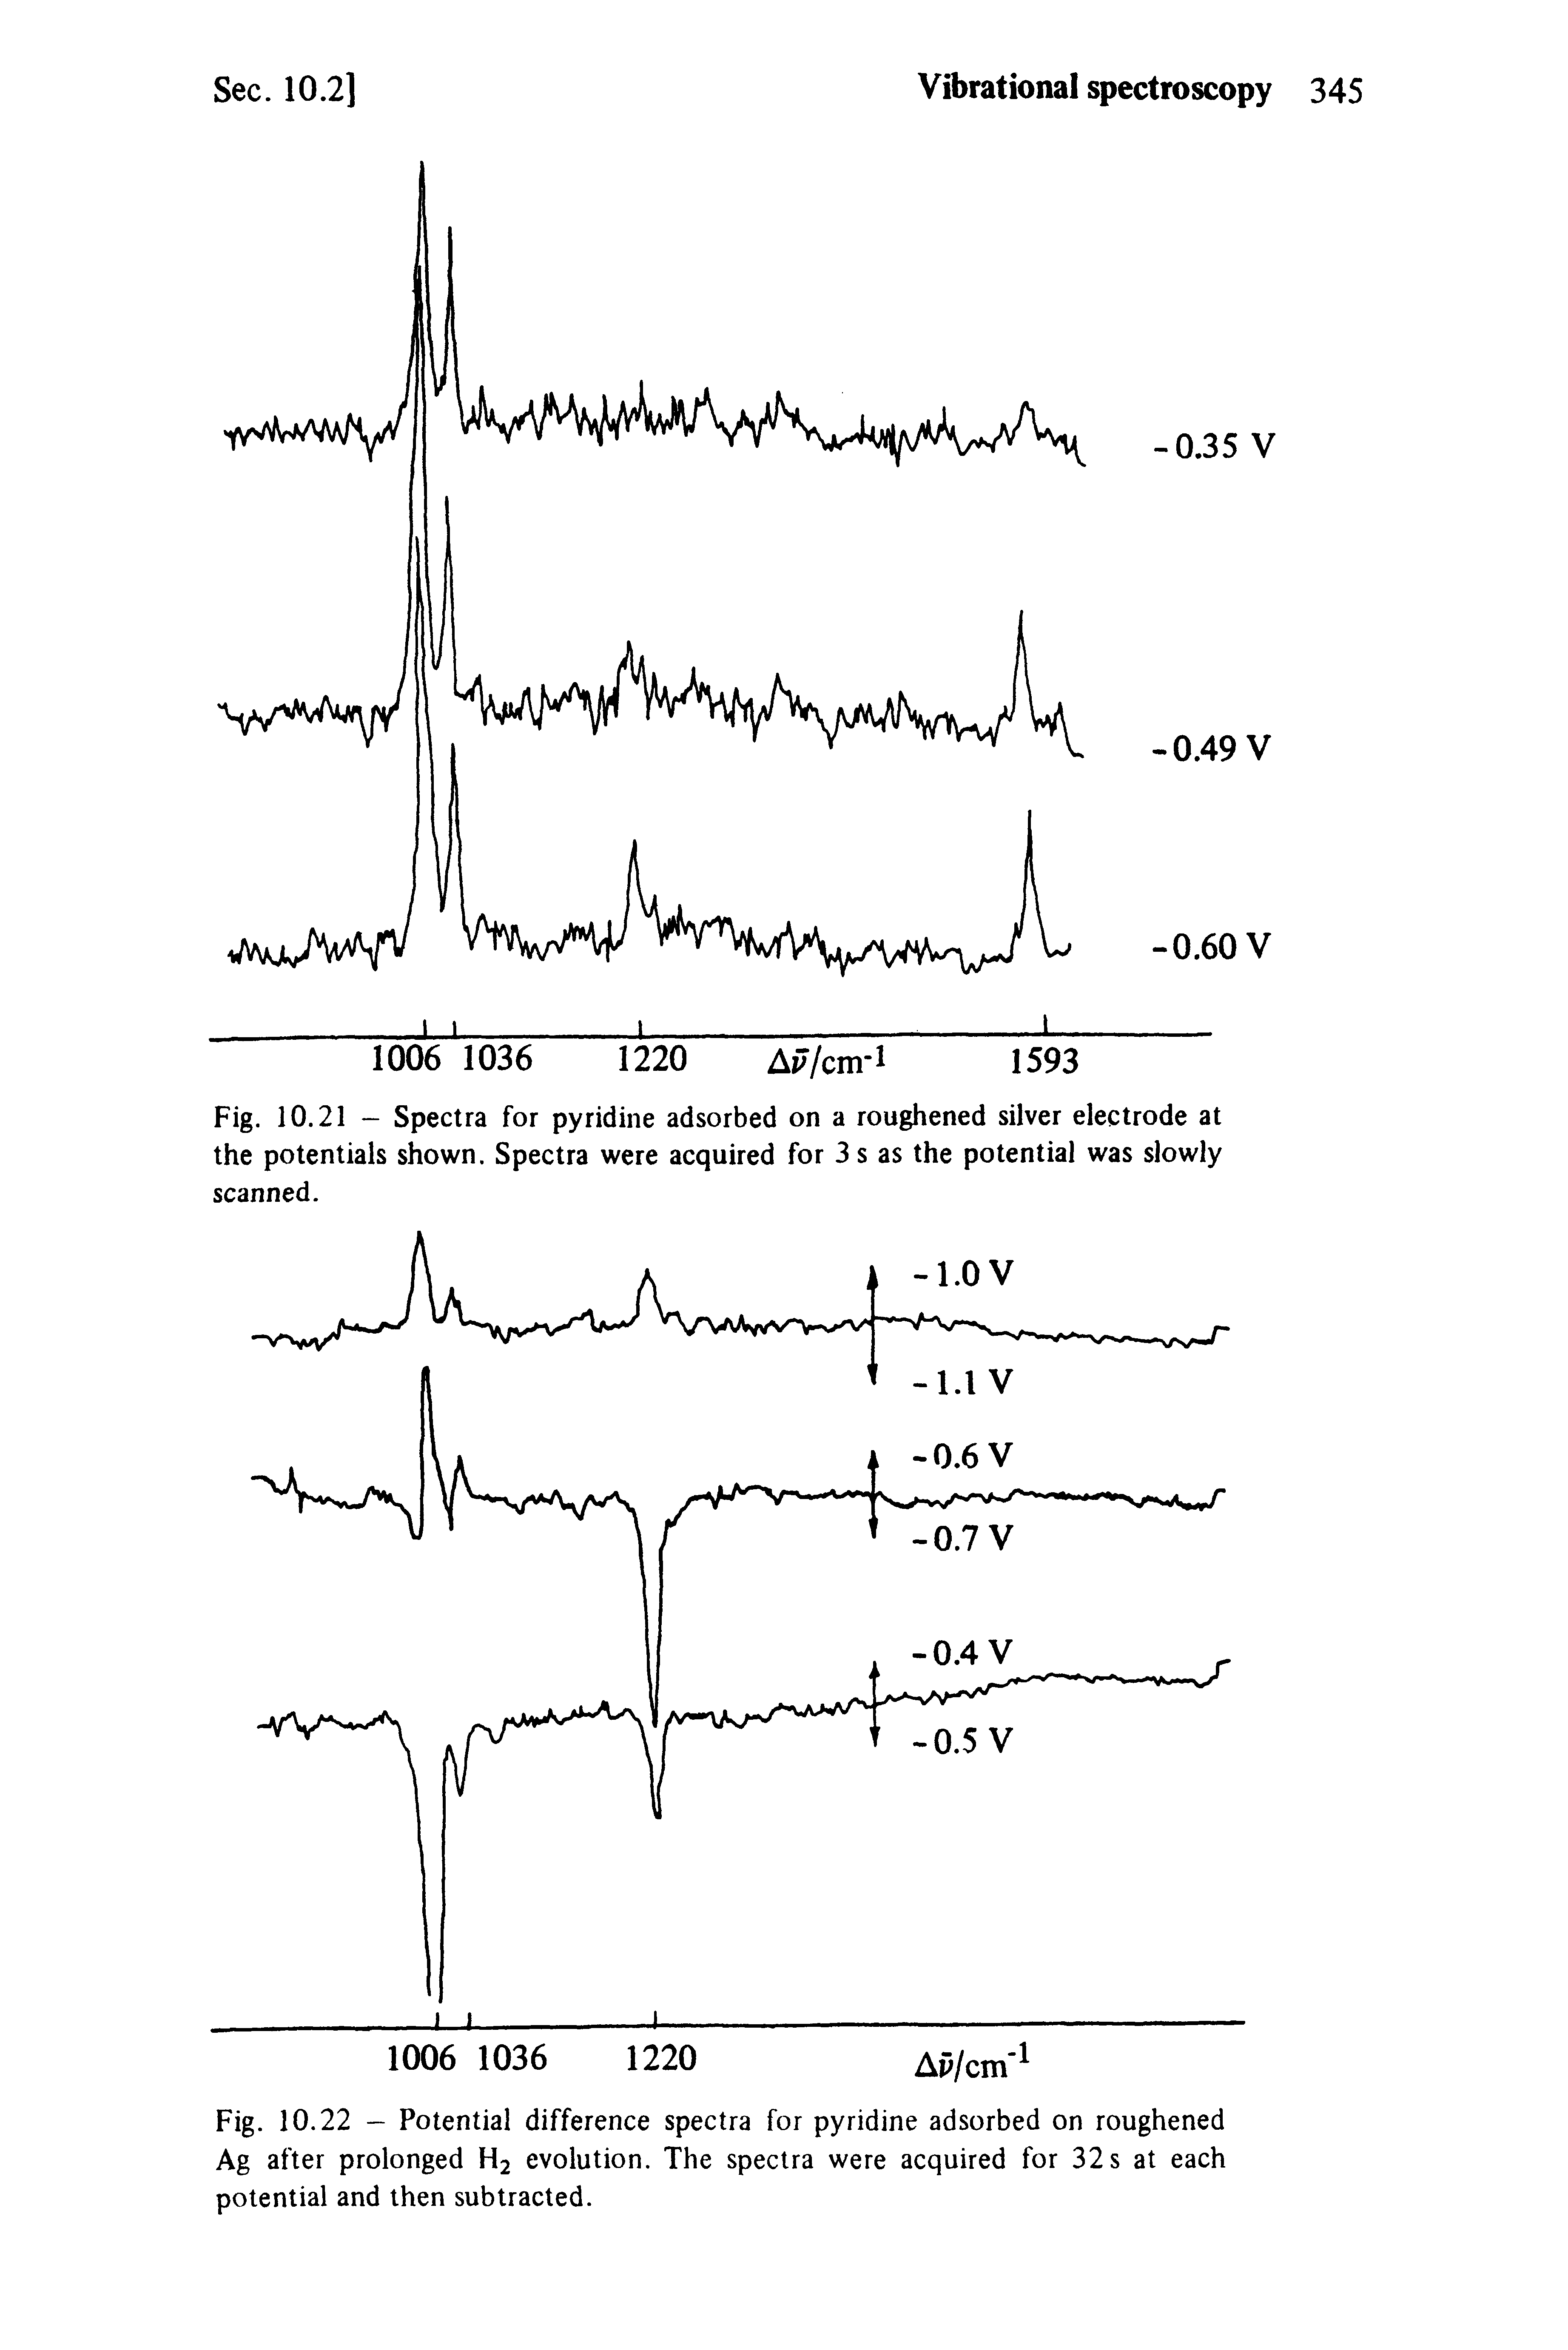 Fig. 10.21 - Spectra for pyridine adsorbed on a roughened silver electrode at the potentials shown. Spectra were acquired for 3 s as the potential was slowly scanned.